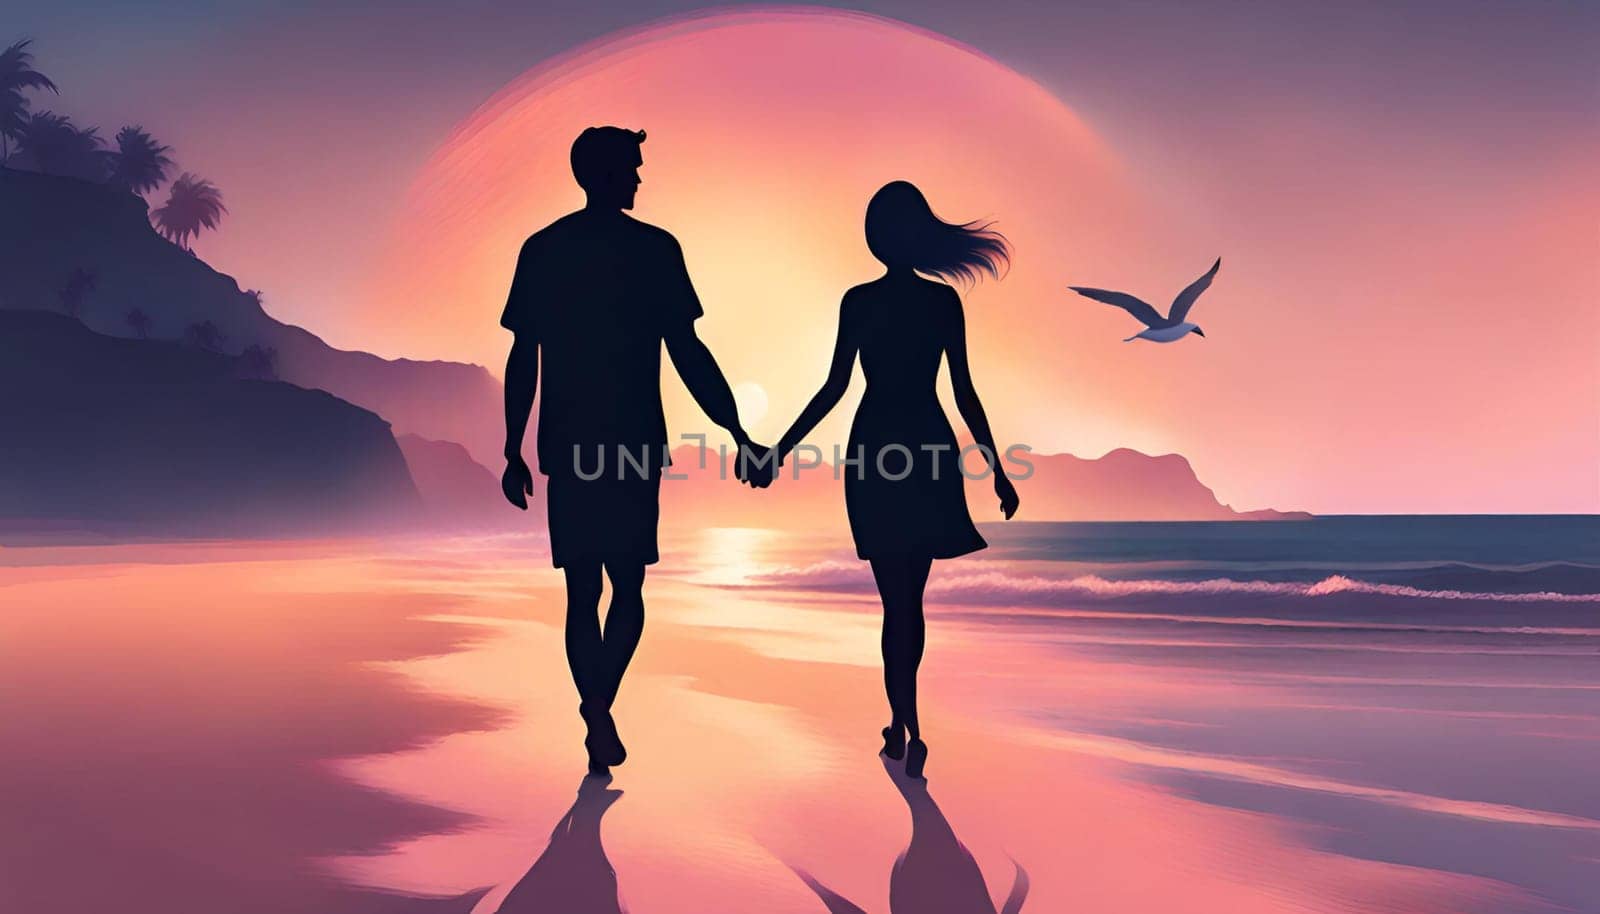 A couple on a beach at sunset. Happy Valentine's Day. by Designlab